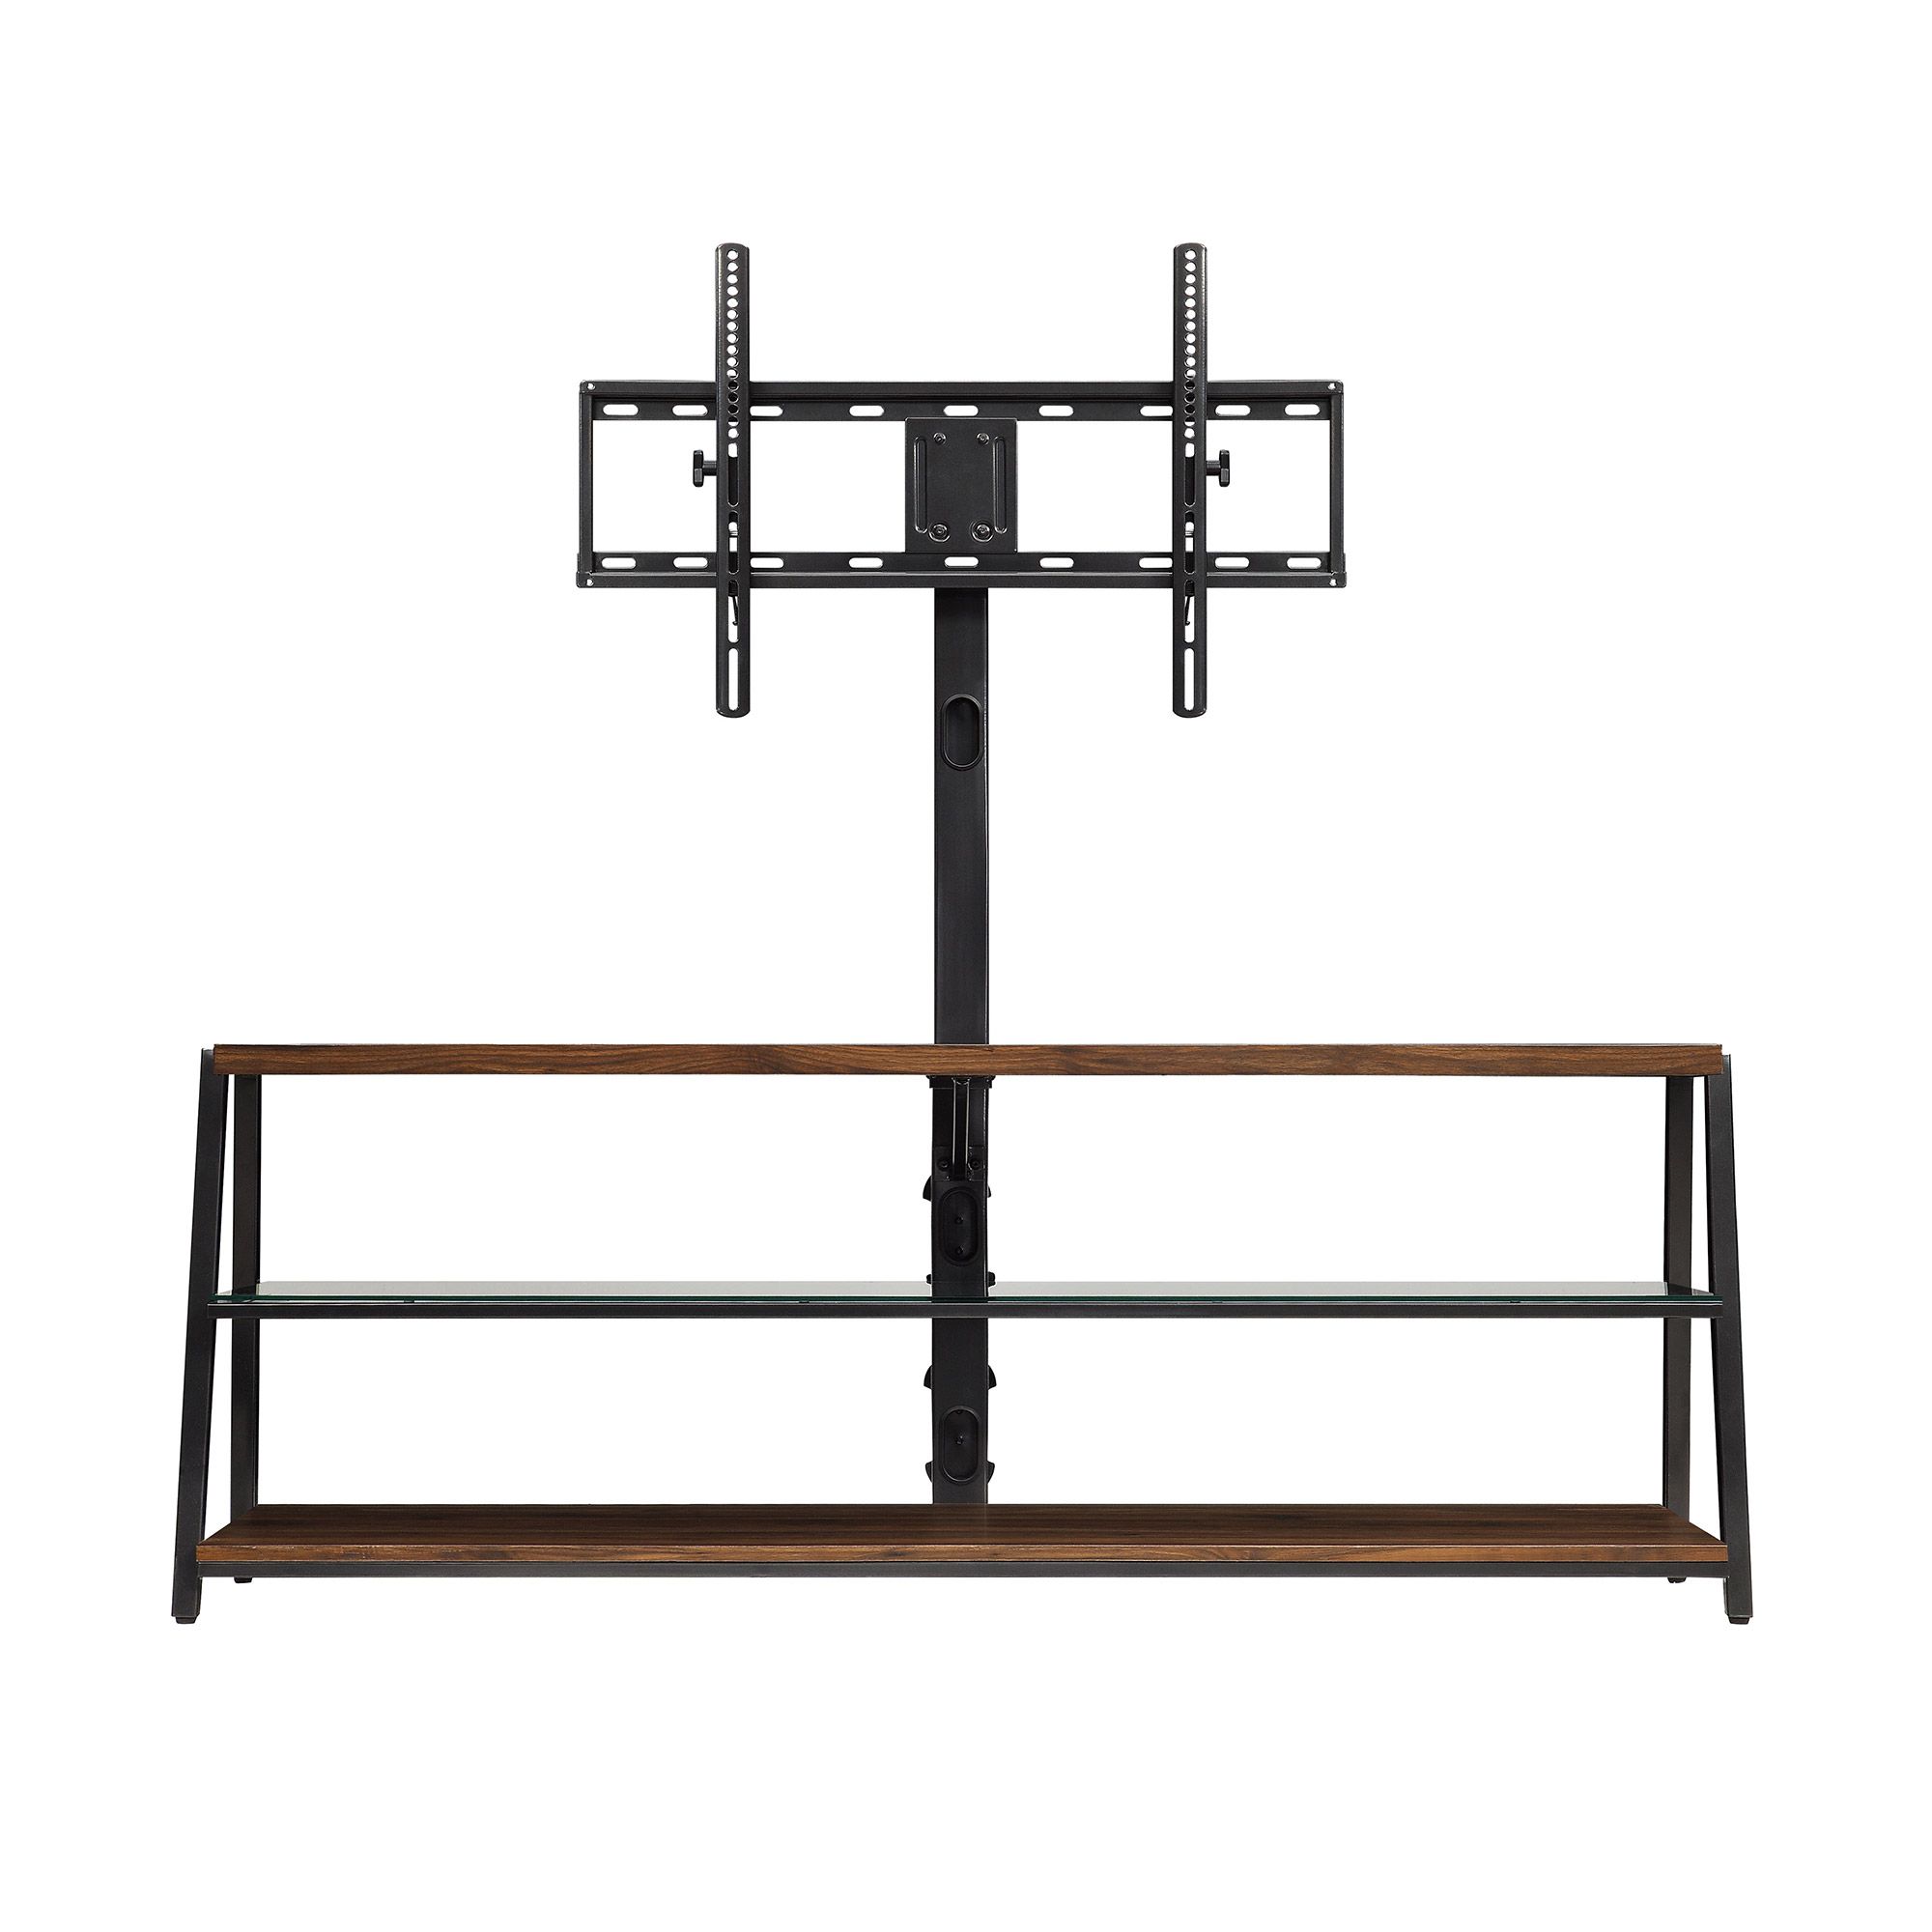 Mainstays Arris 3 In 1 Tv Stand For Televisions Up To 70 With Mainstays Arris 3 In 1 Tv Stands In Canyon Walnut Finish (View 7 of 20)